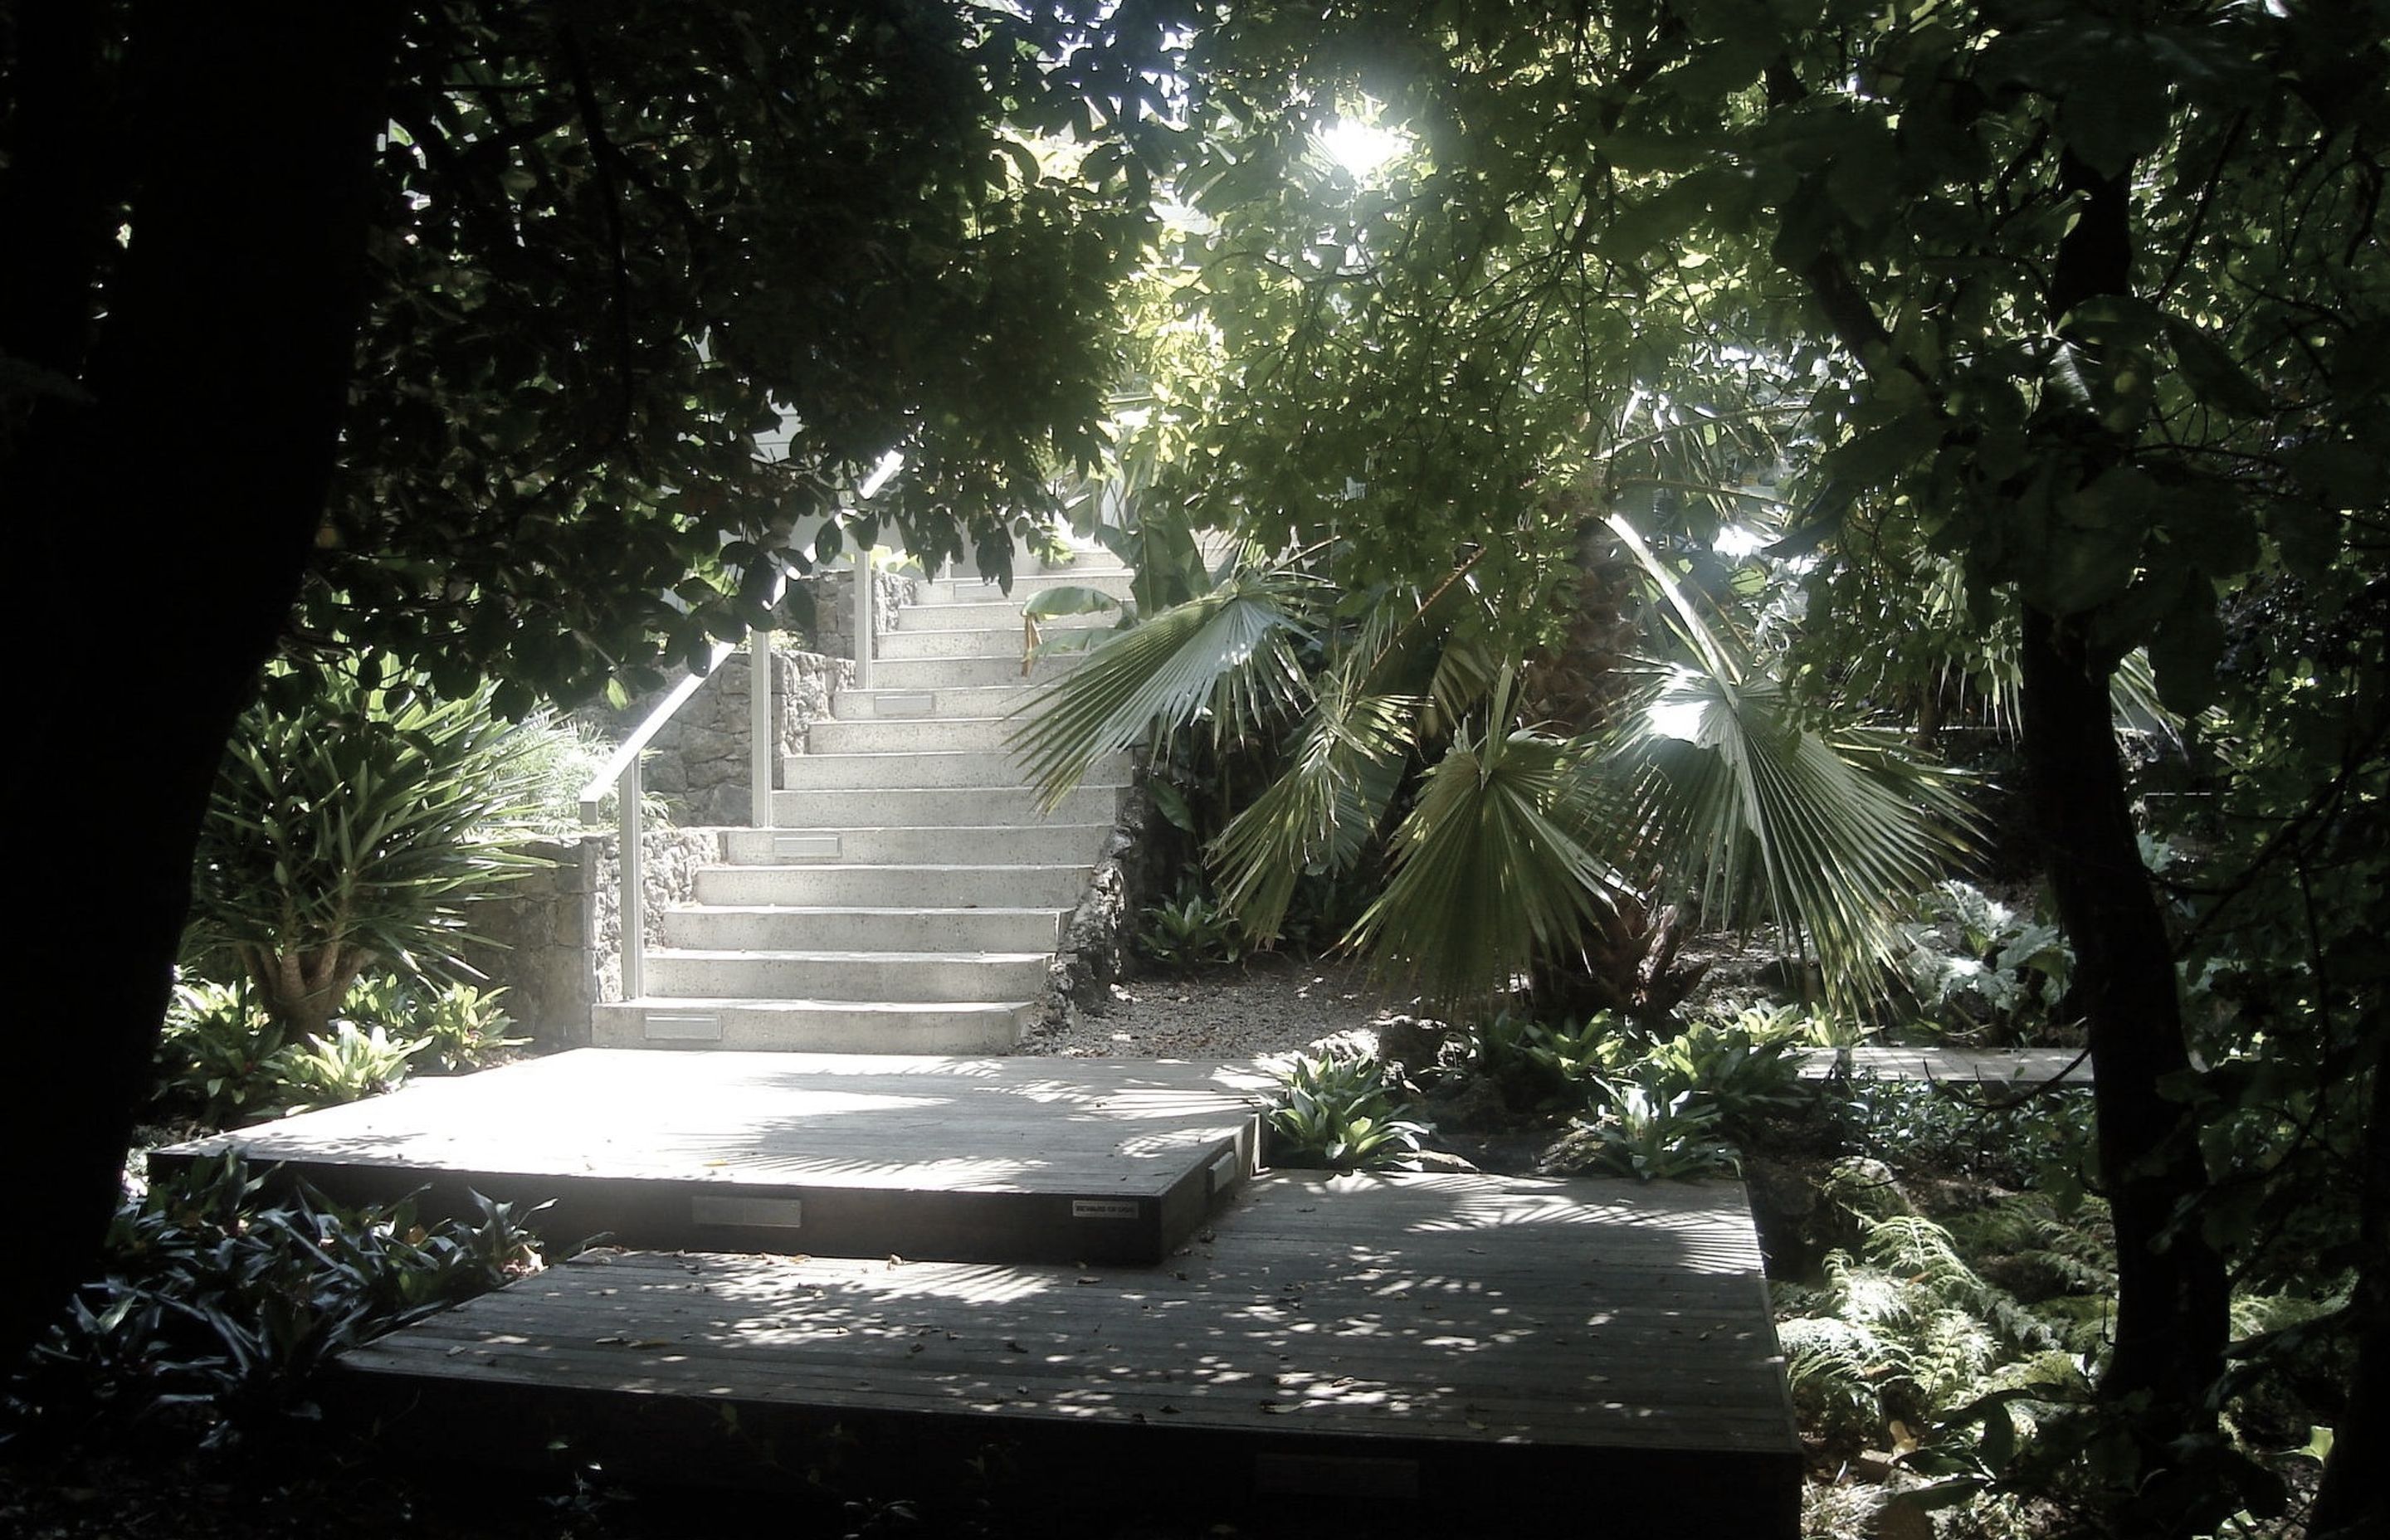 New steps and stone walls provide a elegant contract with the lush vegetation